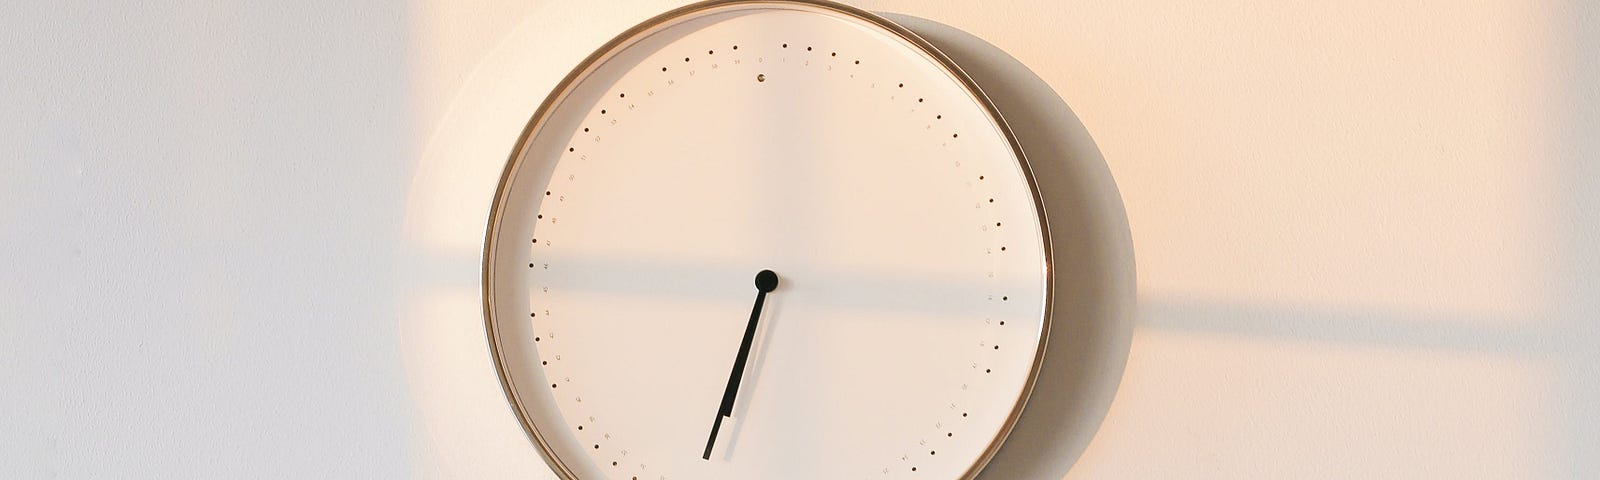 white clock face without numbers on white wall